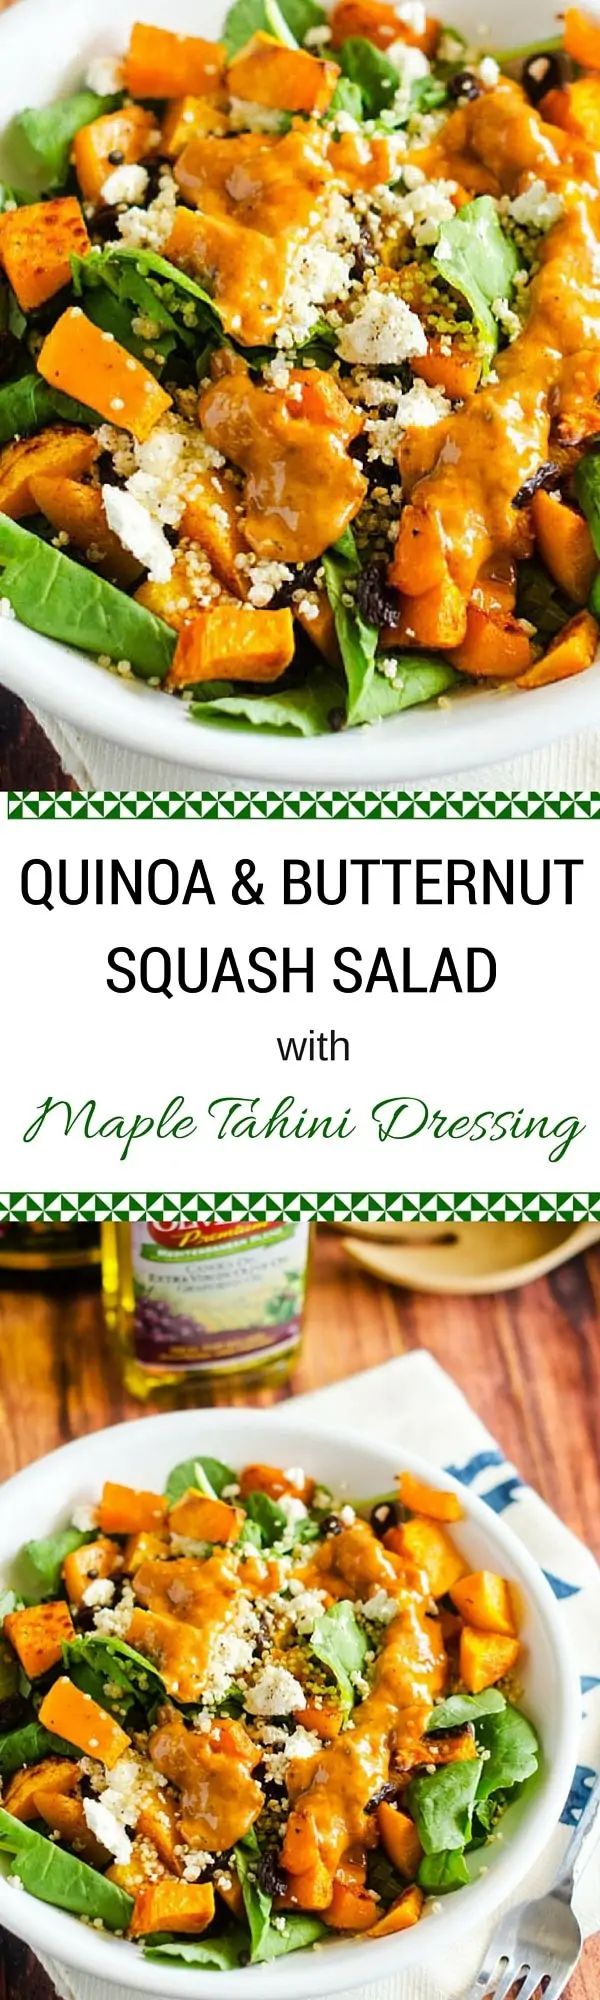 Quinoa & Butternut Squash Salad with Maple Tahini Dressing - This quinoa salad is the perfect fall salad with butternut squash, cranberries and a sweet heat maple dressing. So delicious!